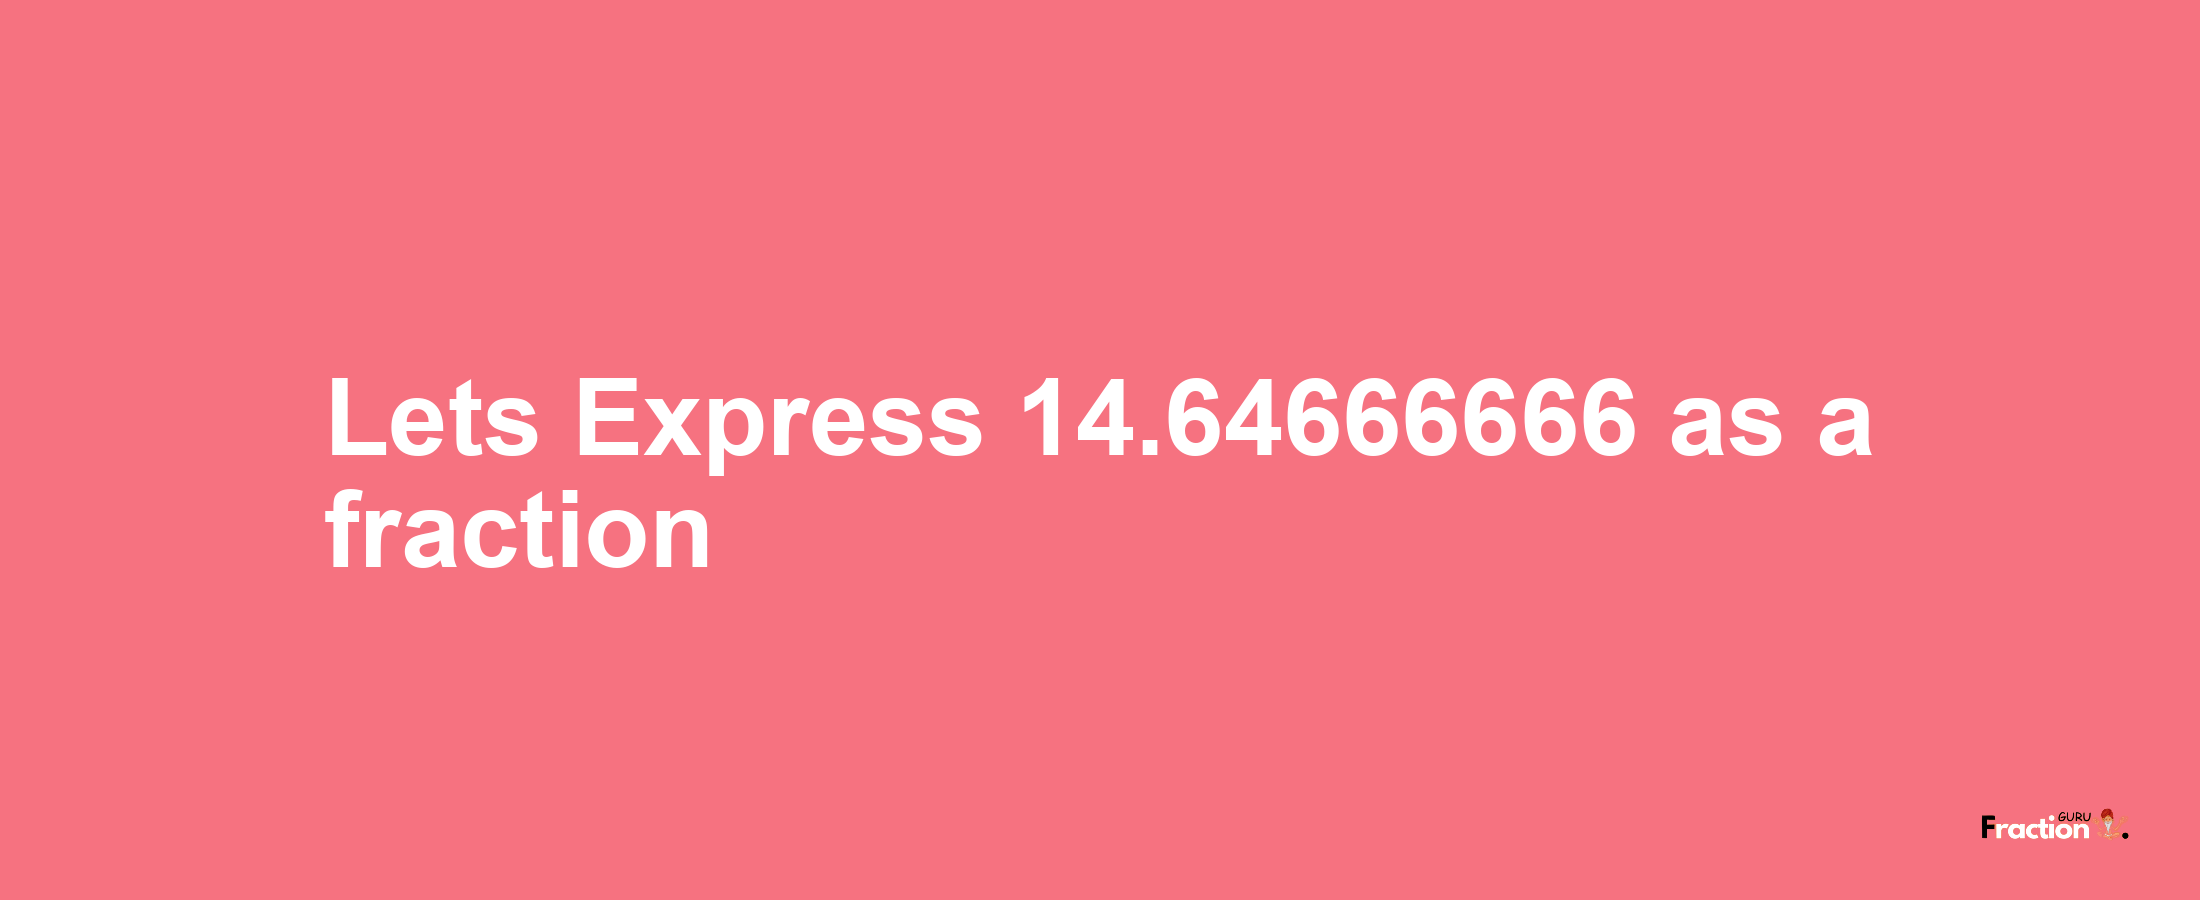 Lets Express 14.64666666 as afraction